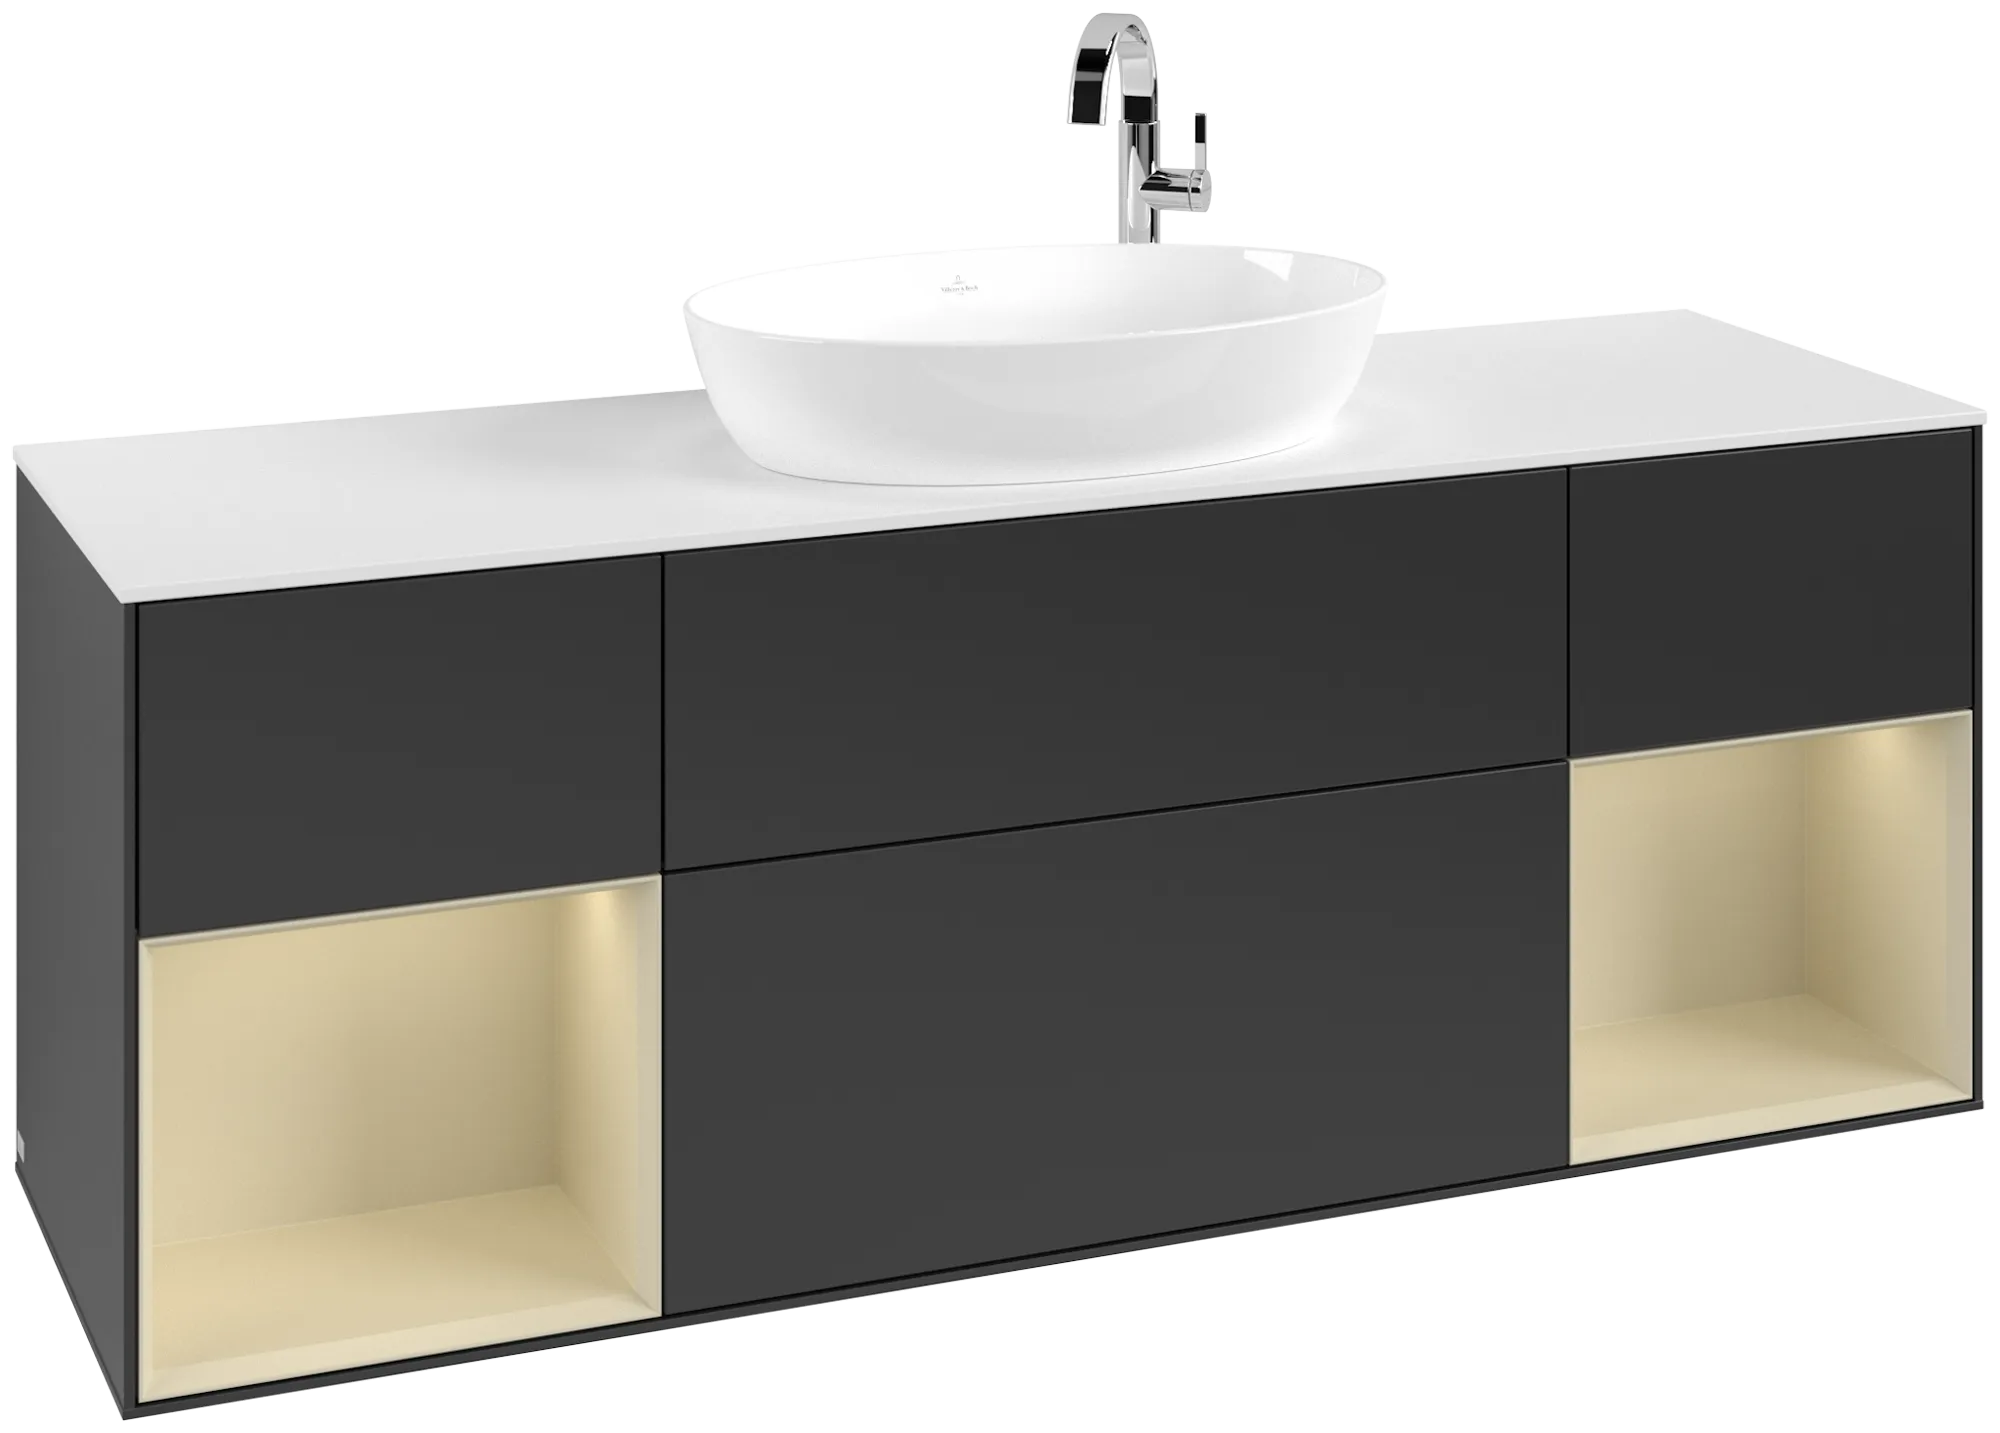 Picture of VILLEROY BOCH Finion Vanity unit, with lighting, 4 pull-out compartments, 1600 x 603 x 501 mm, Black Matt Lacquer / Silk Grey Matt Lacquer / Glass White Matt #G981HJPD